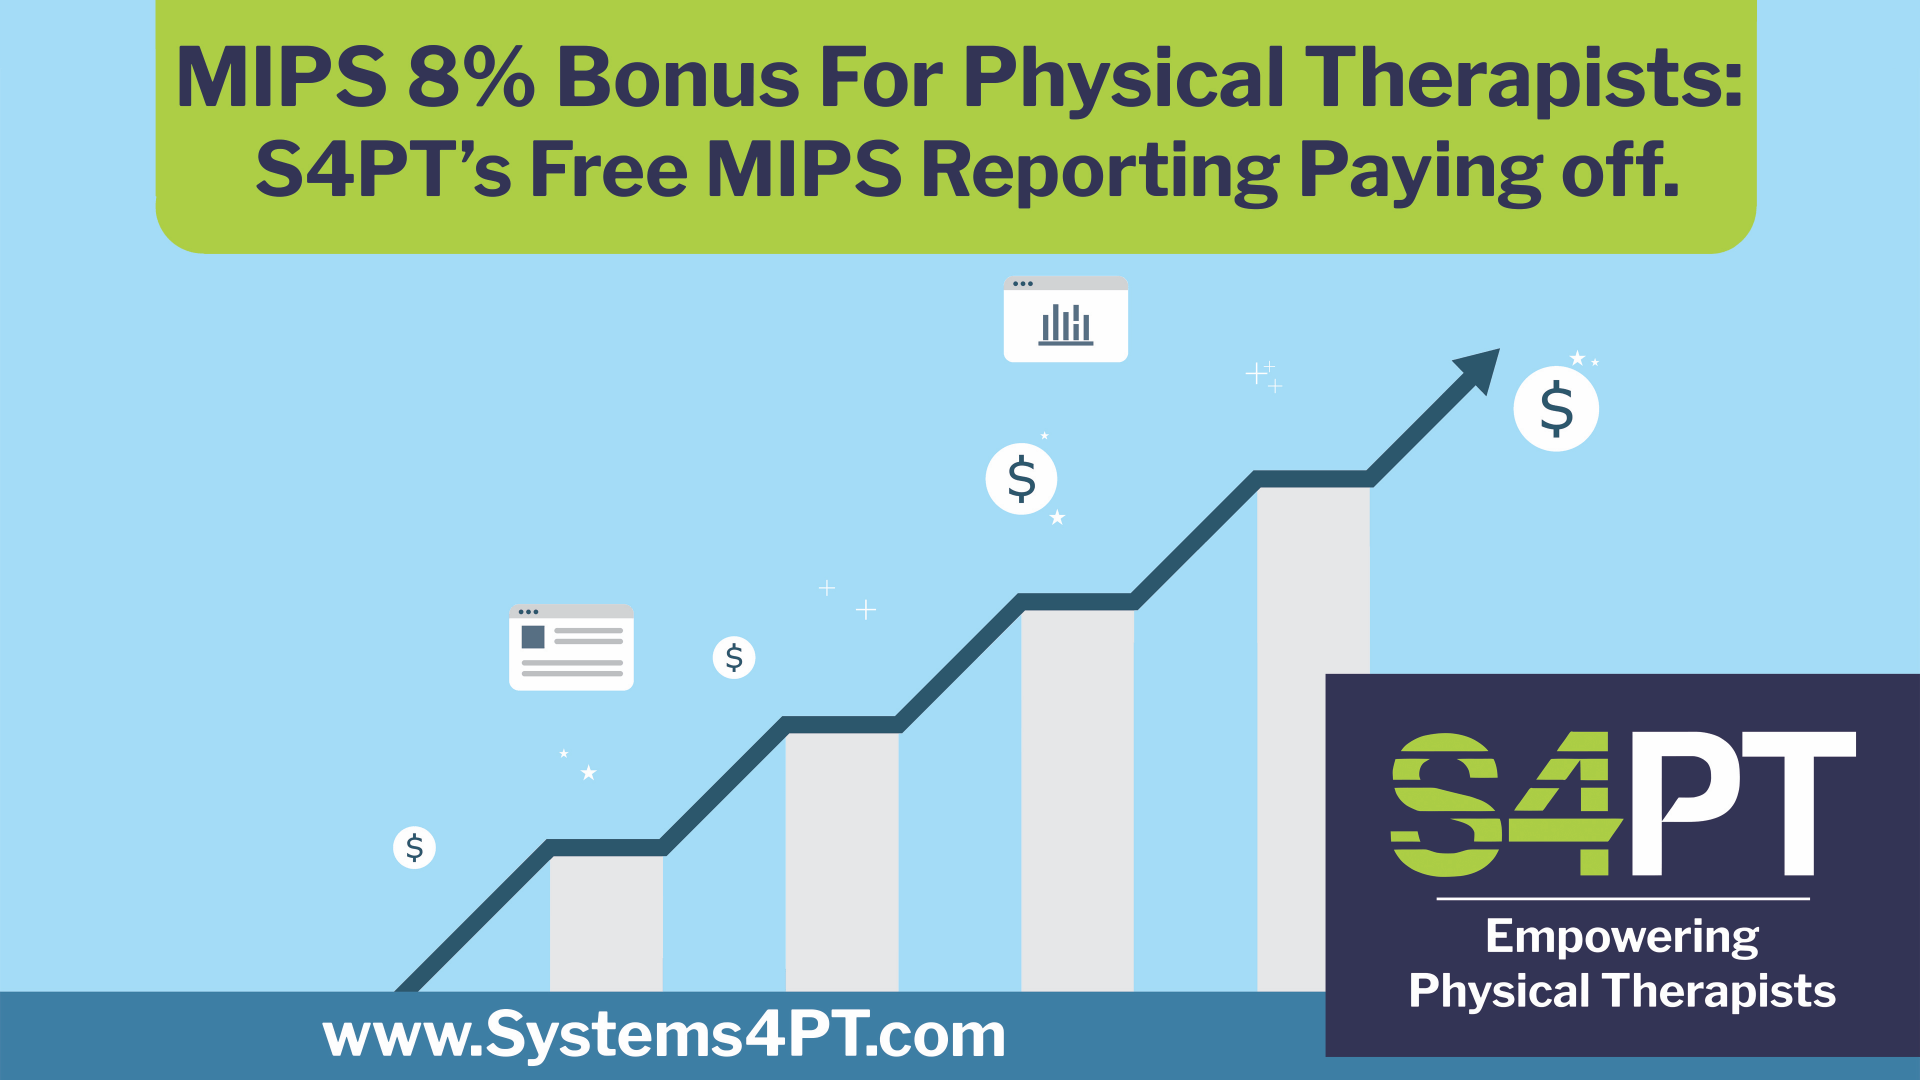 Free MIPS Reporting for All S4PT Clients is Paying Off 